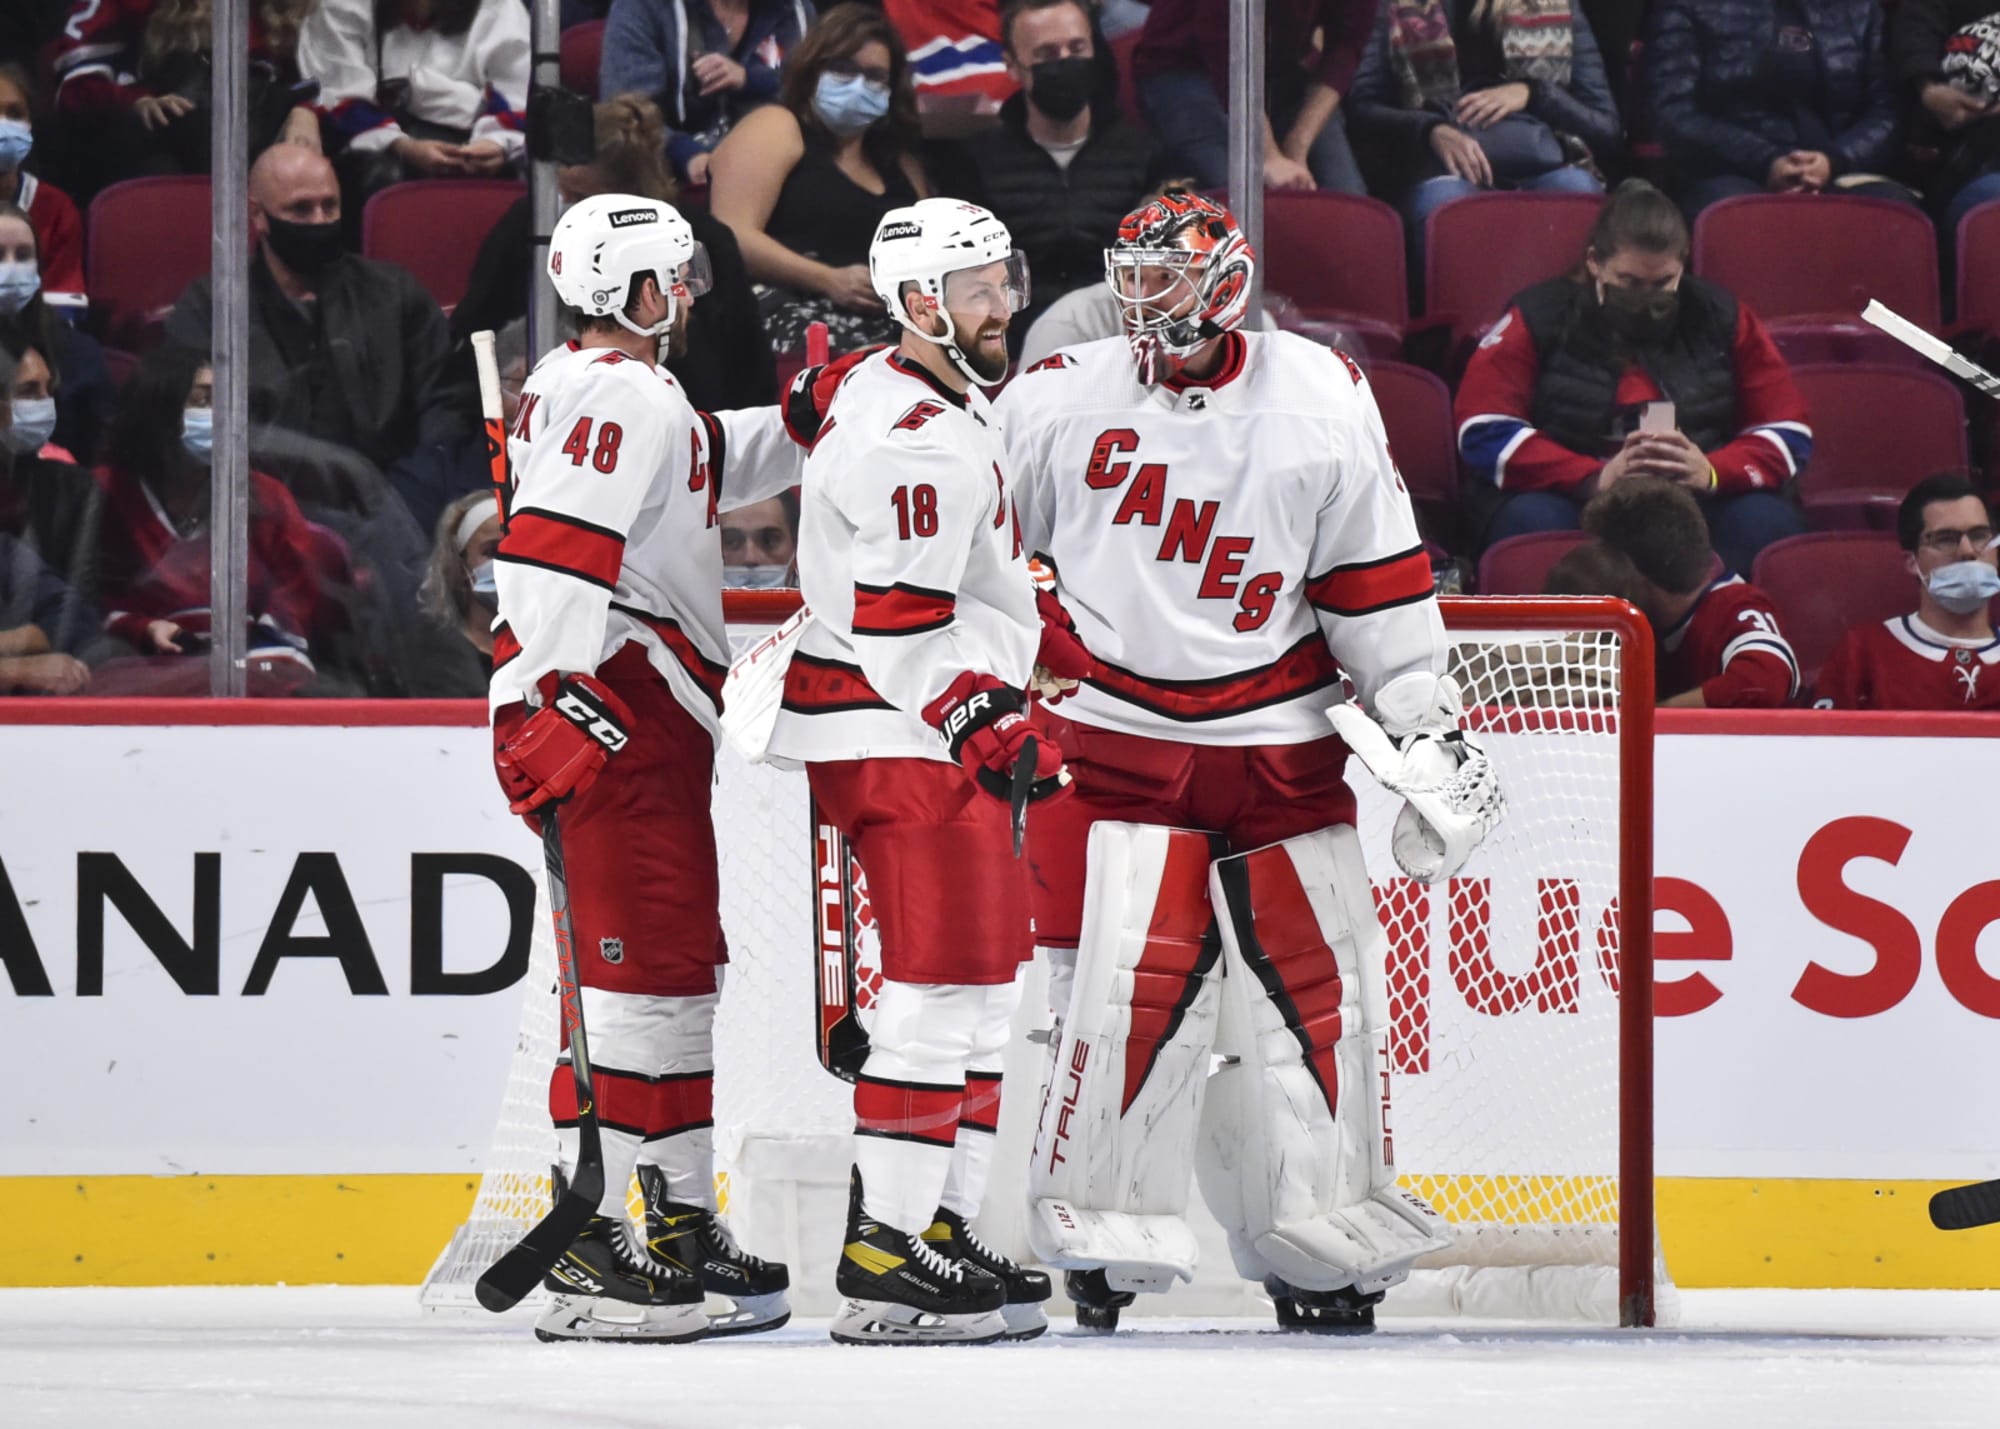 Carolina Hurricanes face next opponent on Wednesday, will be either Rangers  or Devils